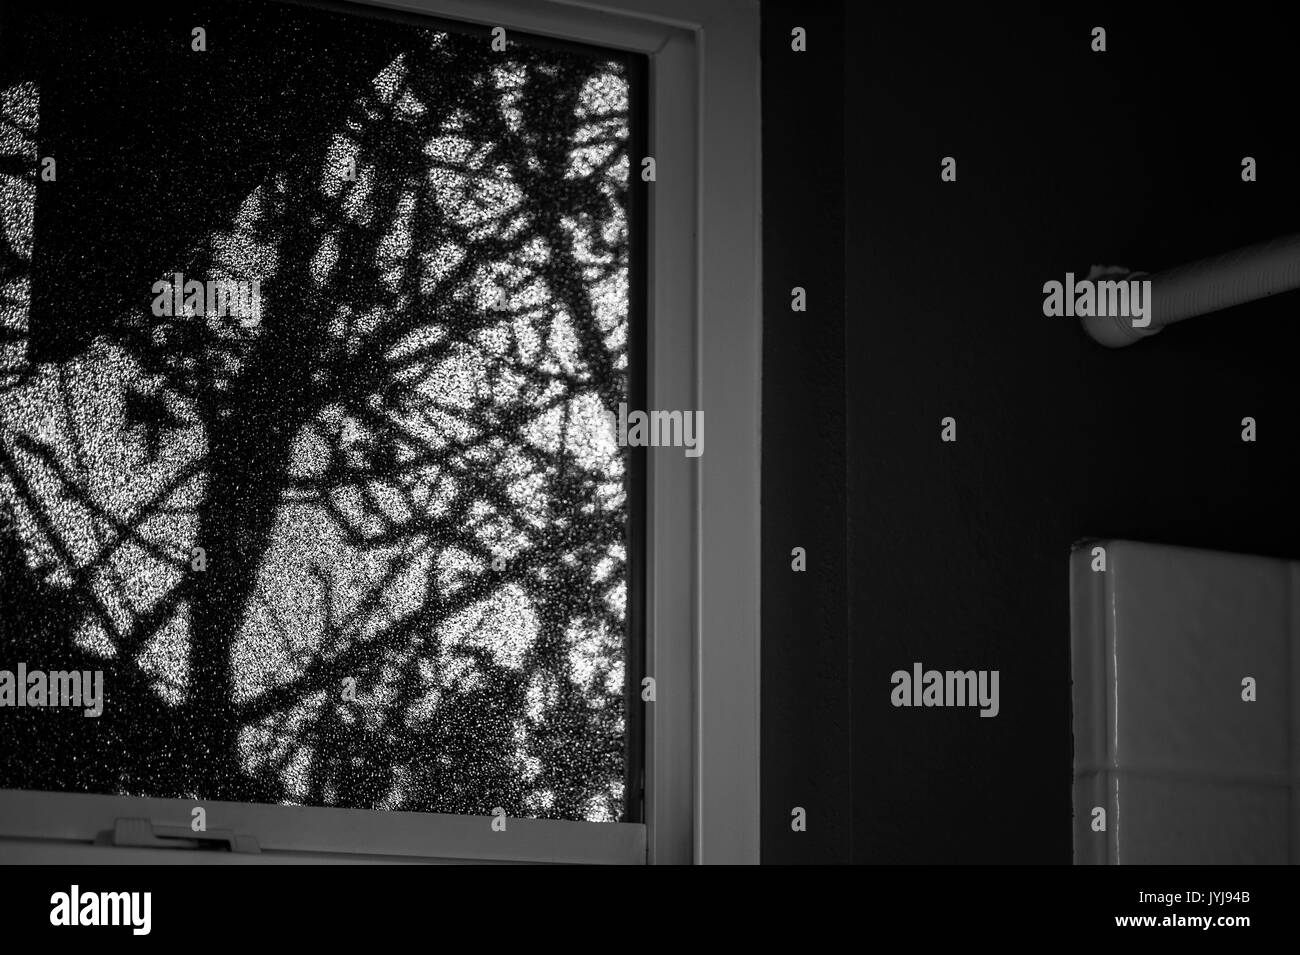 Bathroom window frosted with silhouettes of tree limbs and shower Stock Photo